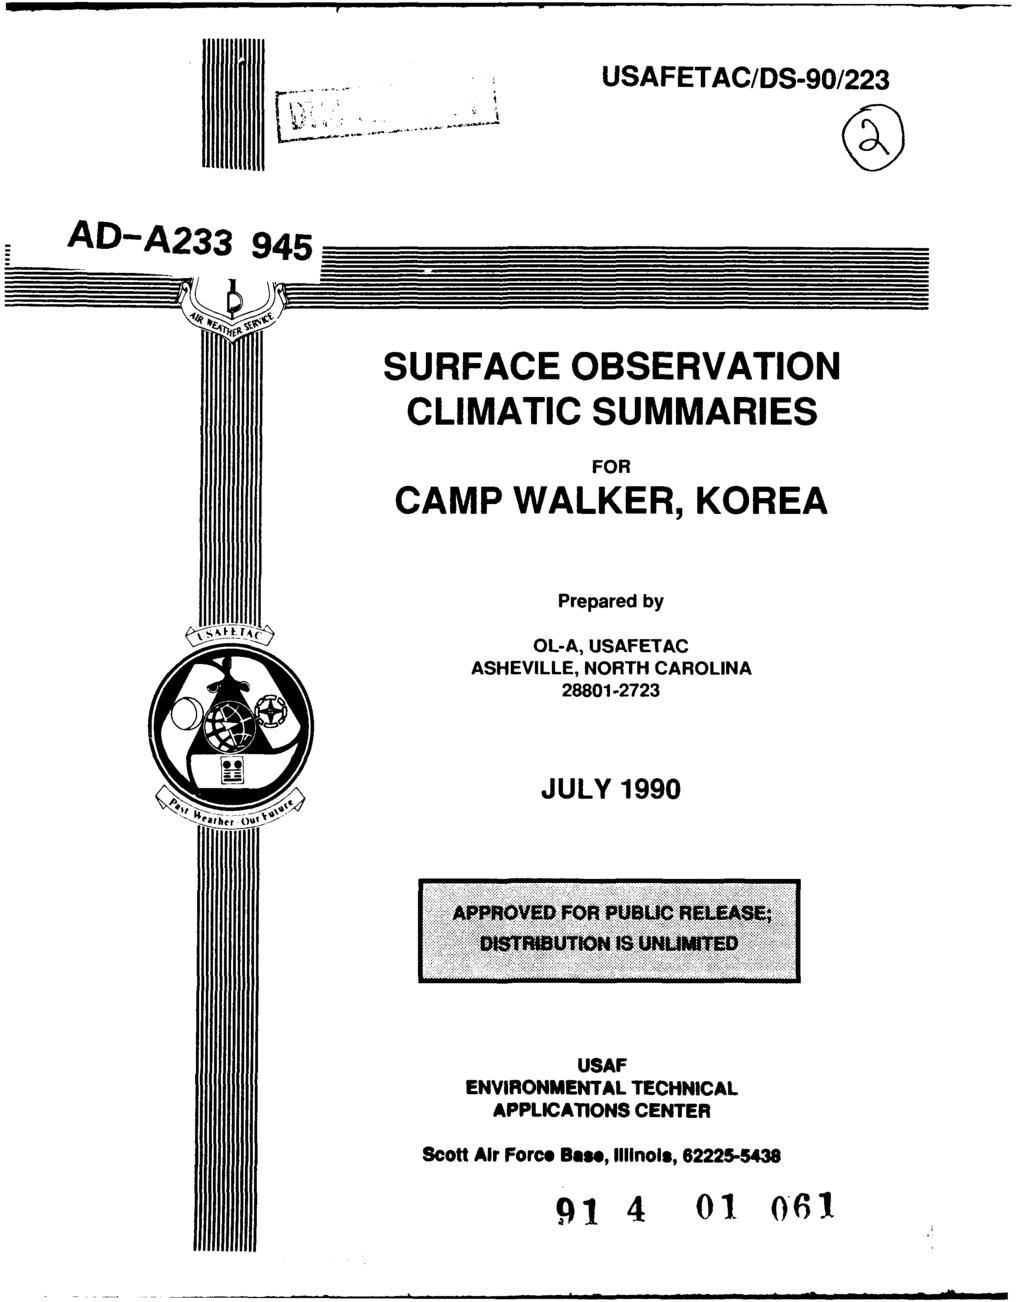 USAFETAC/DS-90/223 AD-A233 945 SURFACE OBSERVATION CLIMATIC SUMMARIES FOR CAMP WALKER, KOREA Prepared by 01-A, USAFETAC ASHEVILLE, NORTH CAROLINA 28801-2723